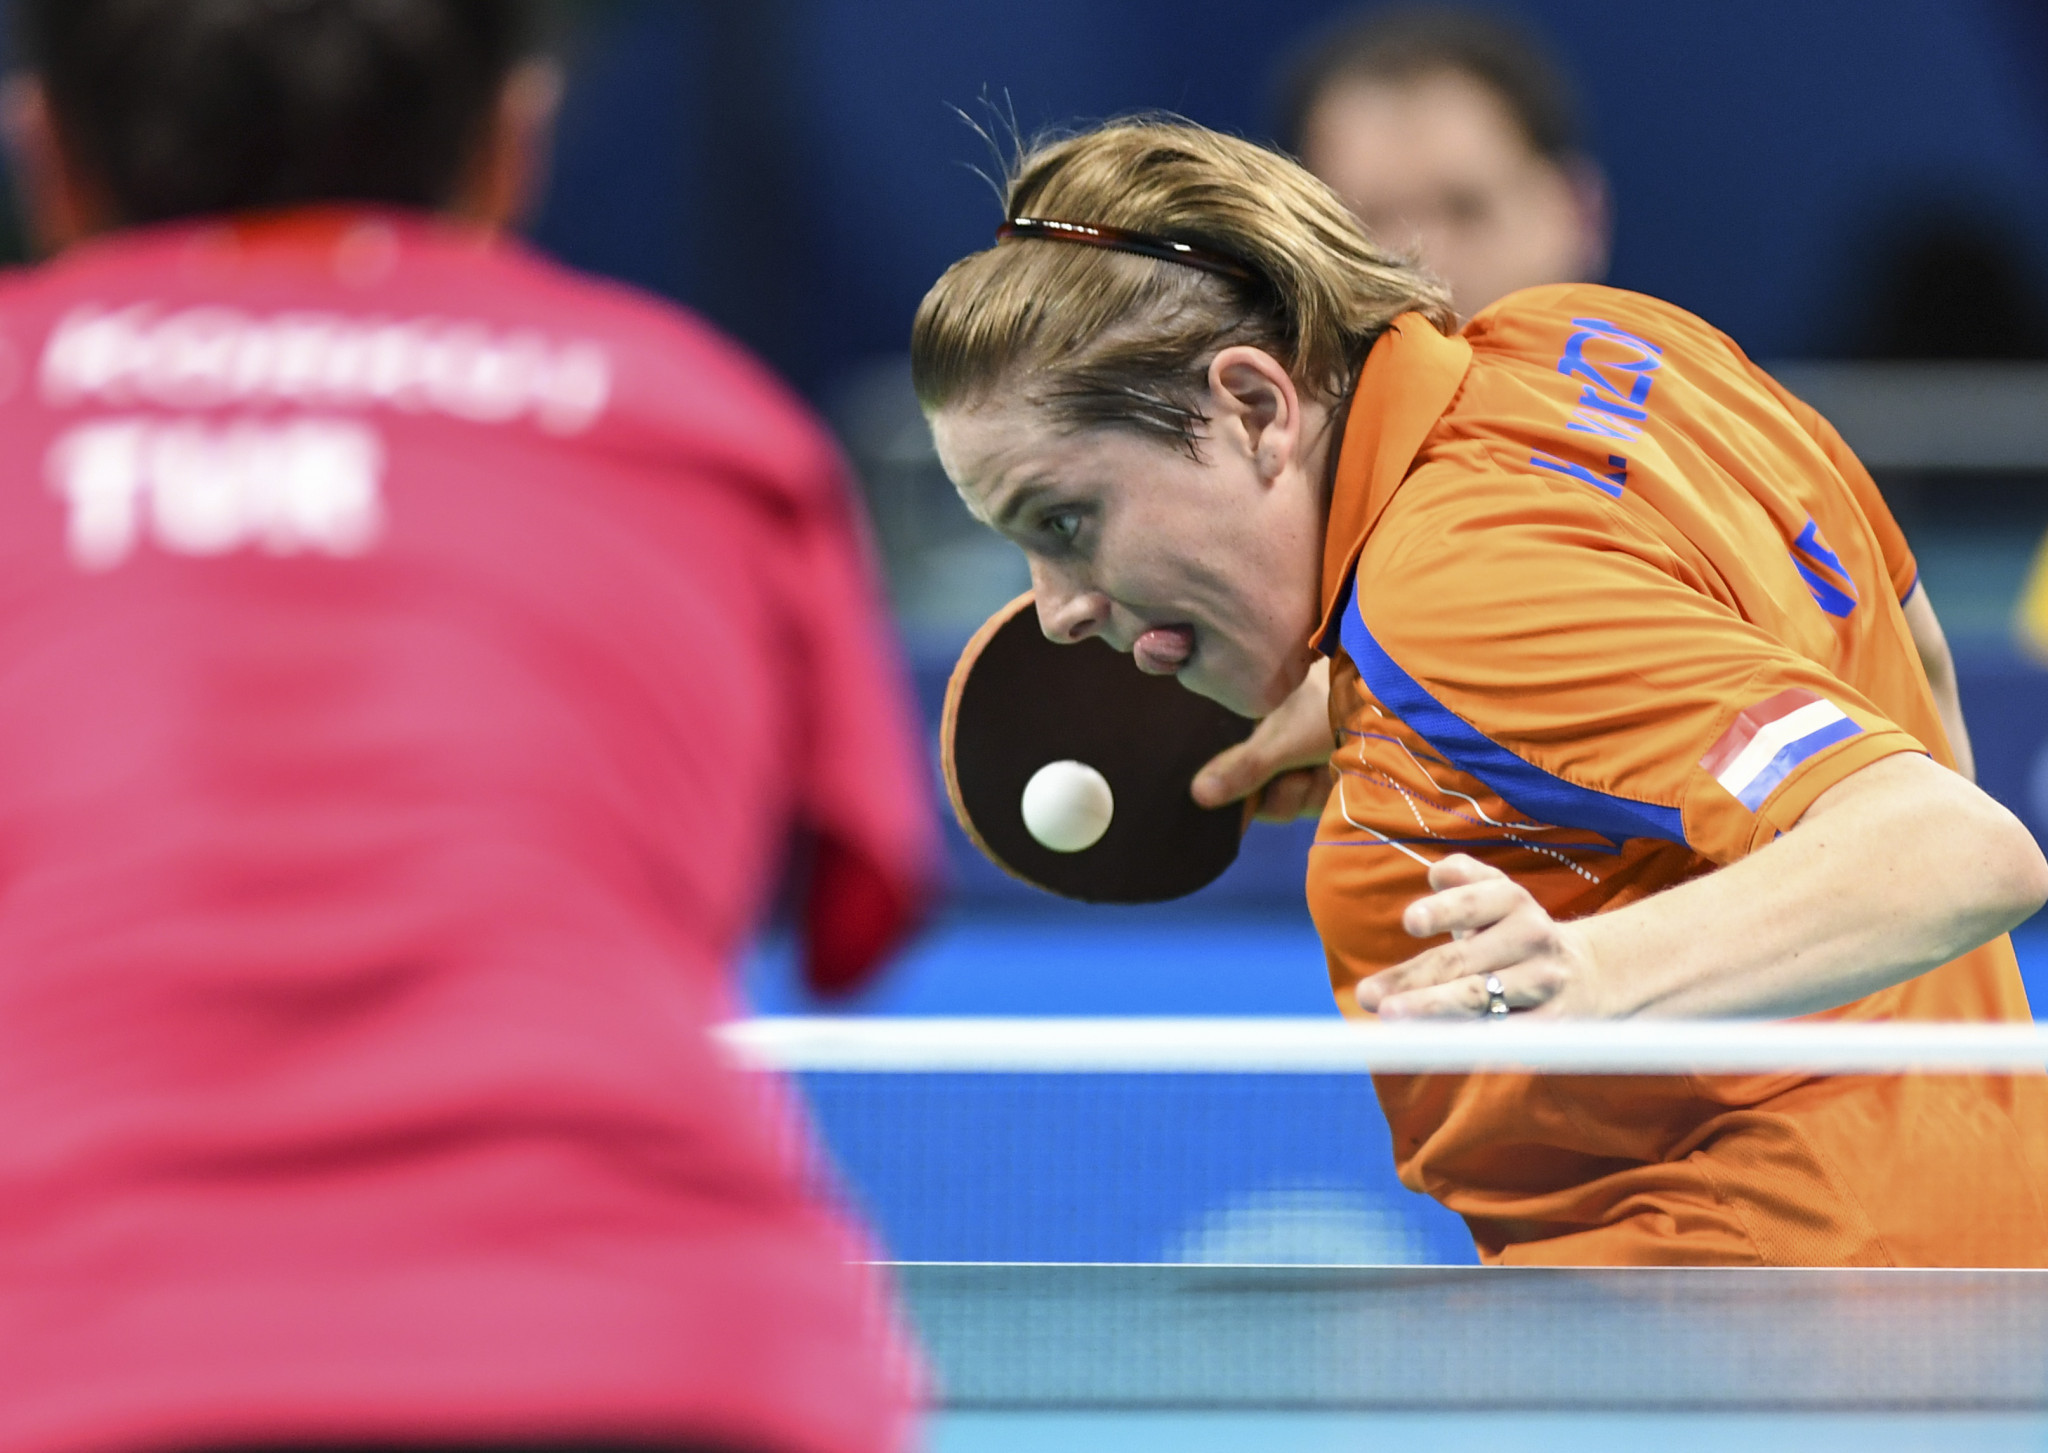 Another Paralympic champion, Kelly Van Zon of The Netherlands, was knocked out in the semi-finals ©Getty Images